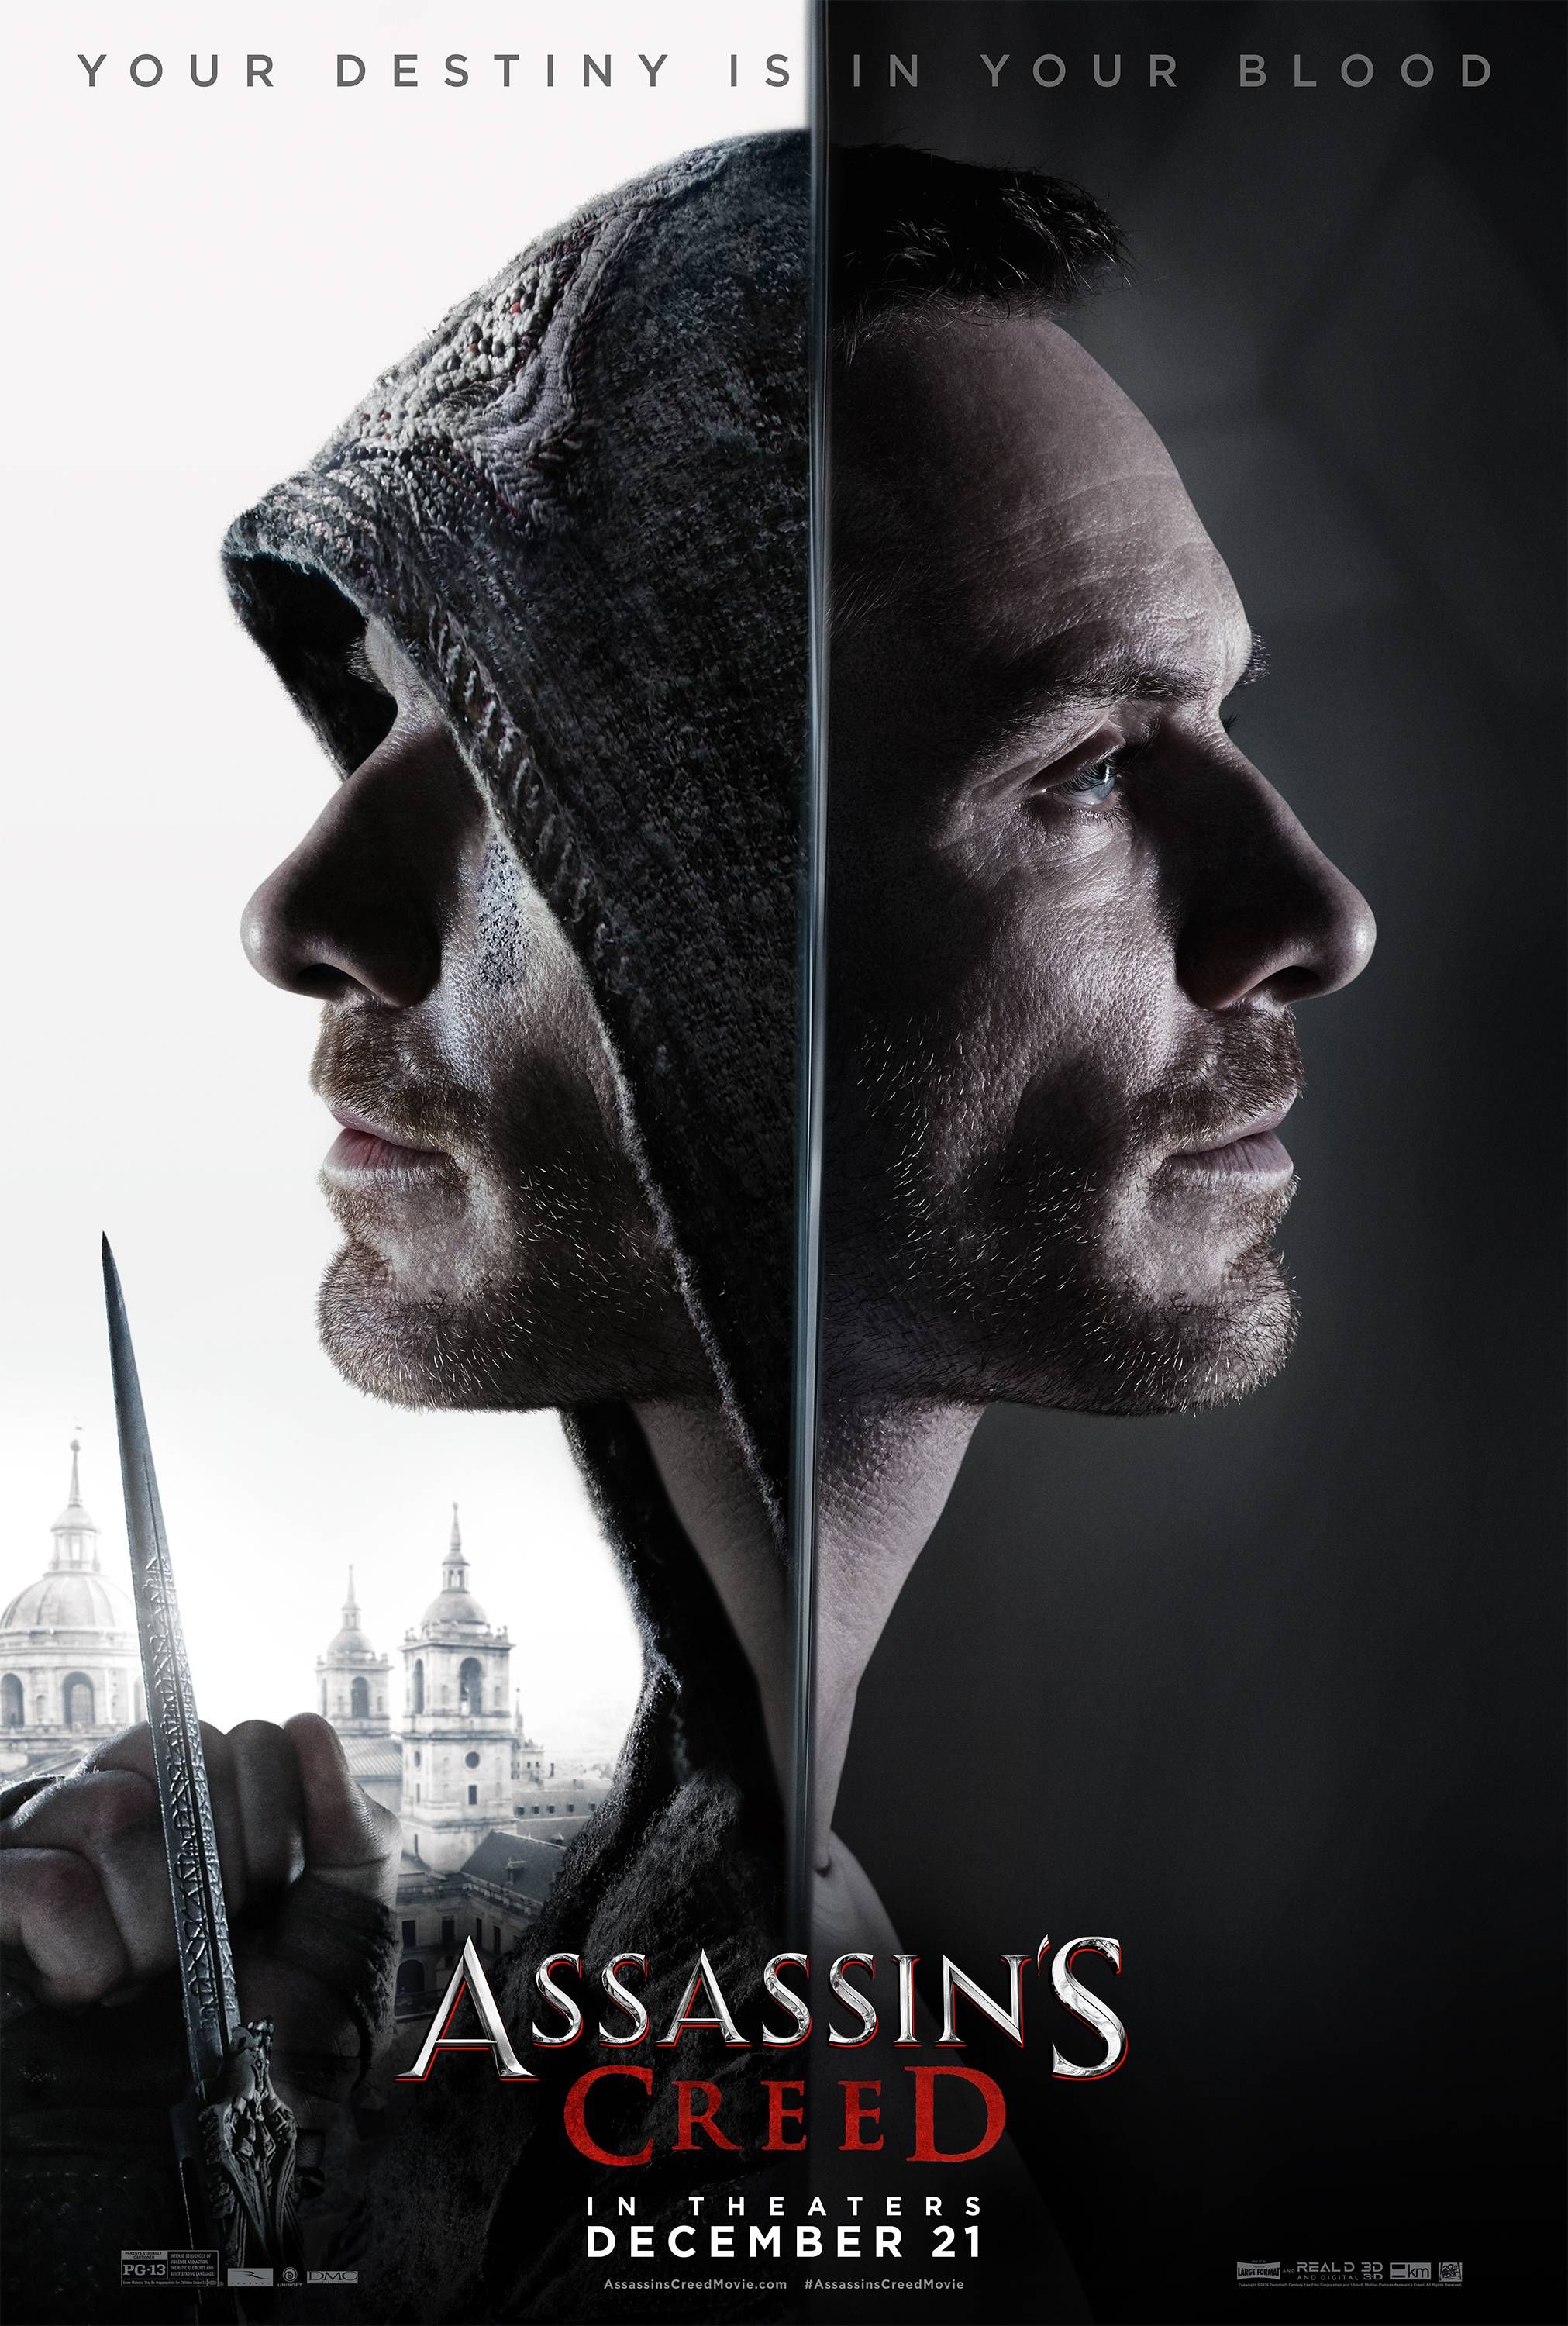 'Assassin's Creed' - New Poster